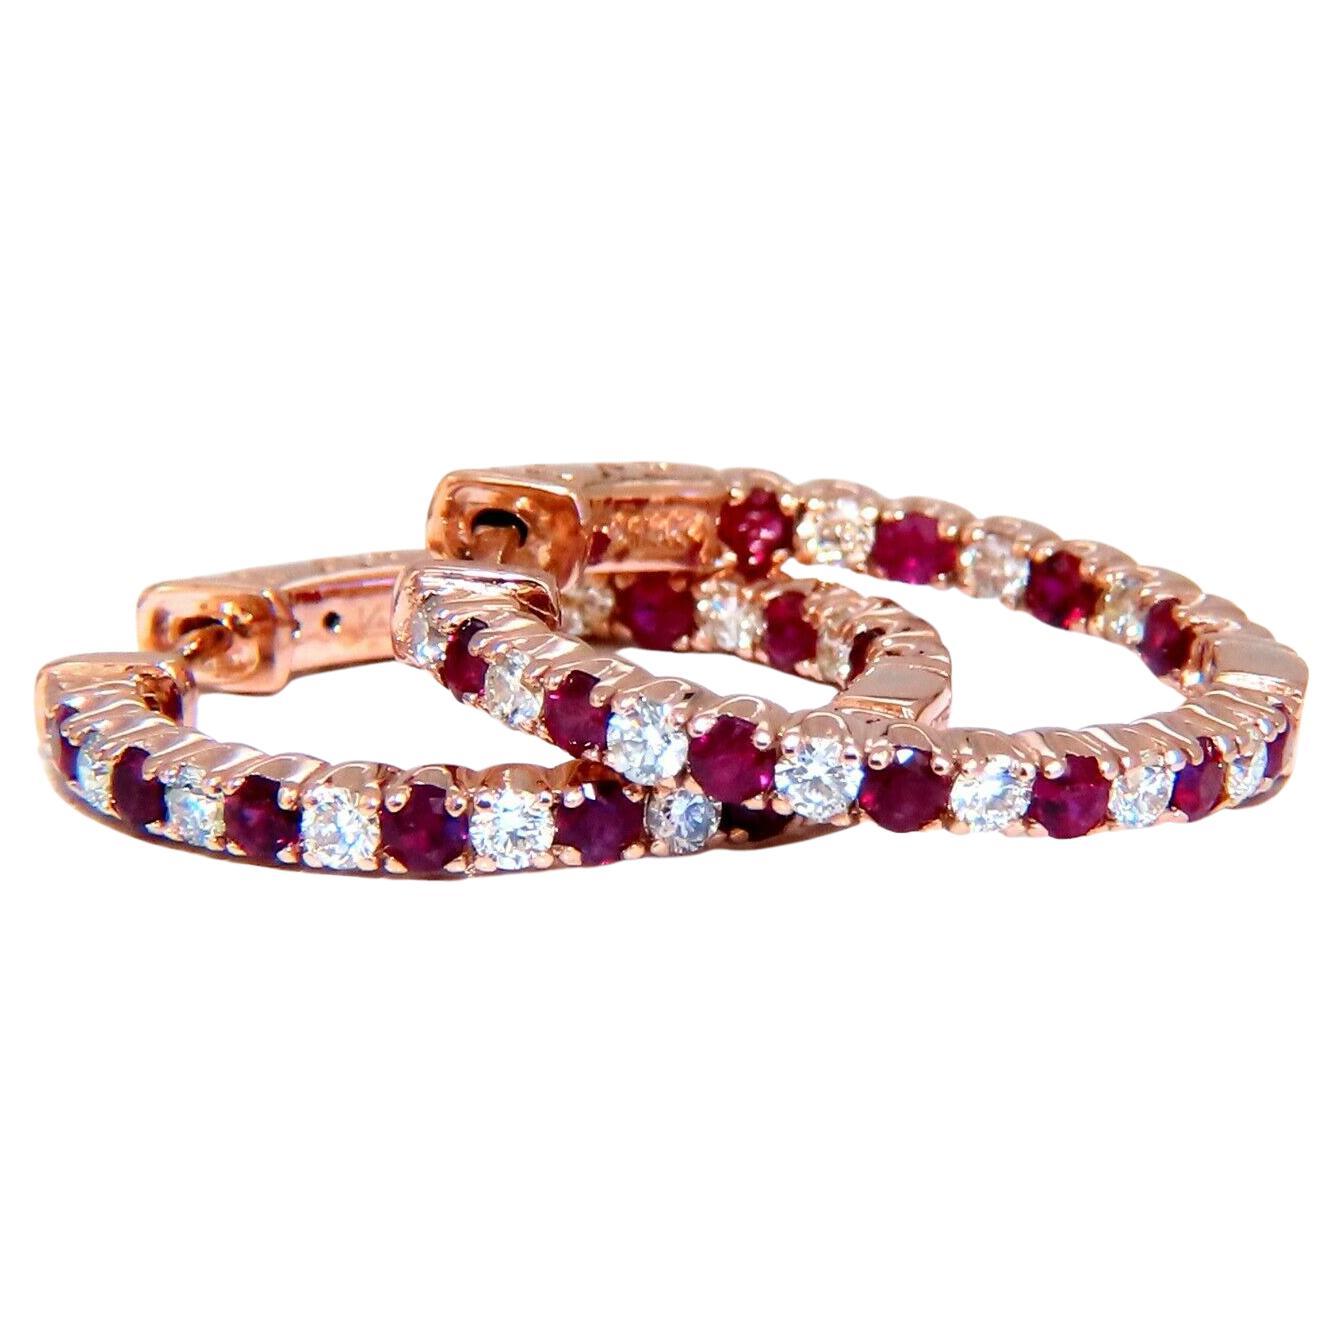 2.20ct Natural Ruby Diamonds Hoop Earrings 14kt Rose Gold Inside Out For Sale